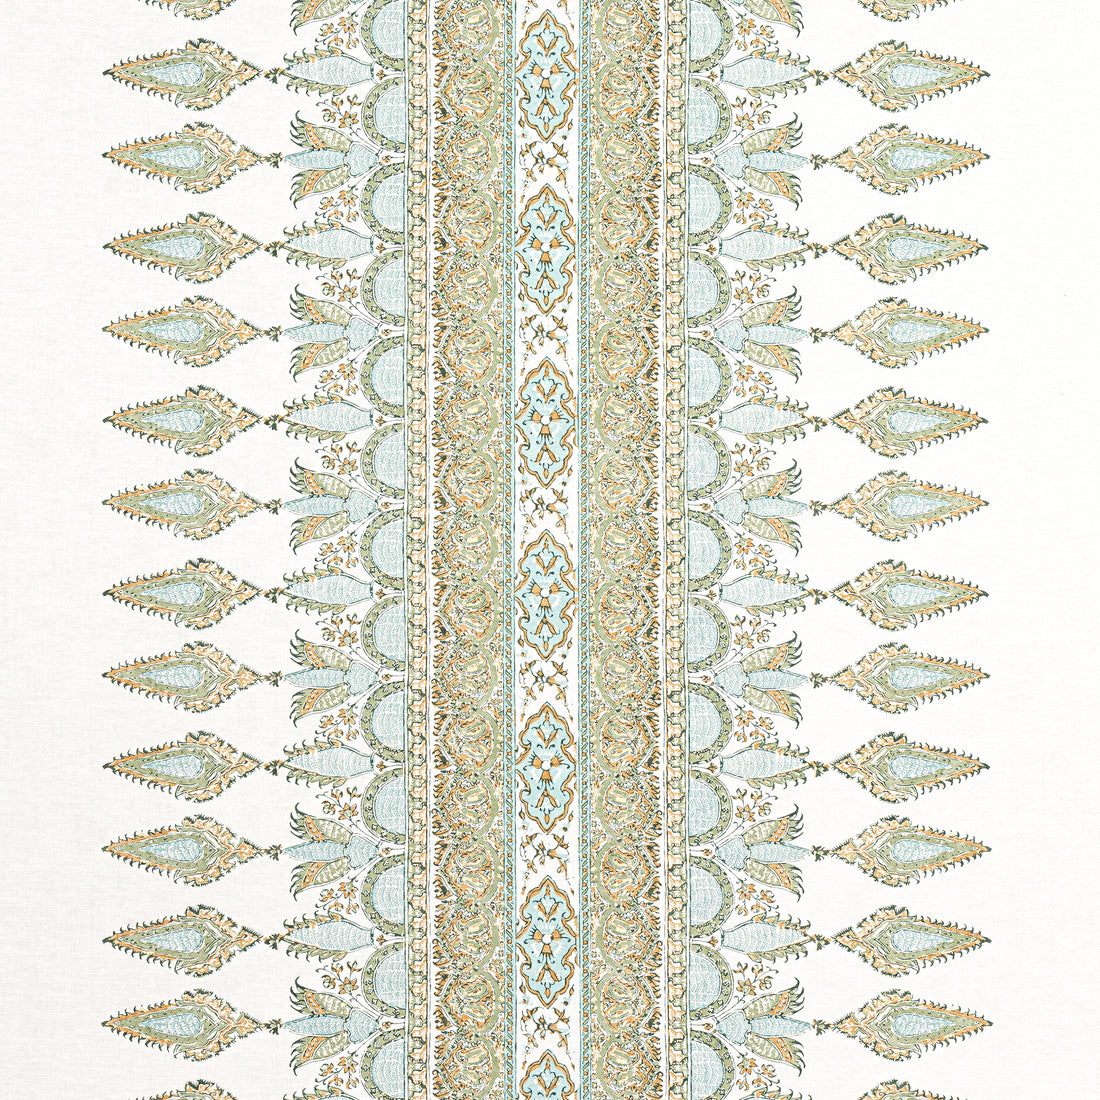 Akola Stripe fabric in seaglass and gold color - pattern number F936408 - by Thibaut in the Indienne collection